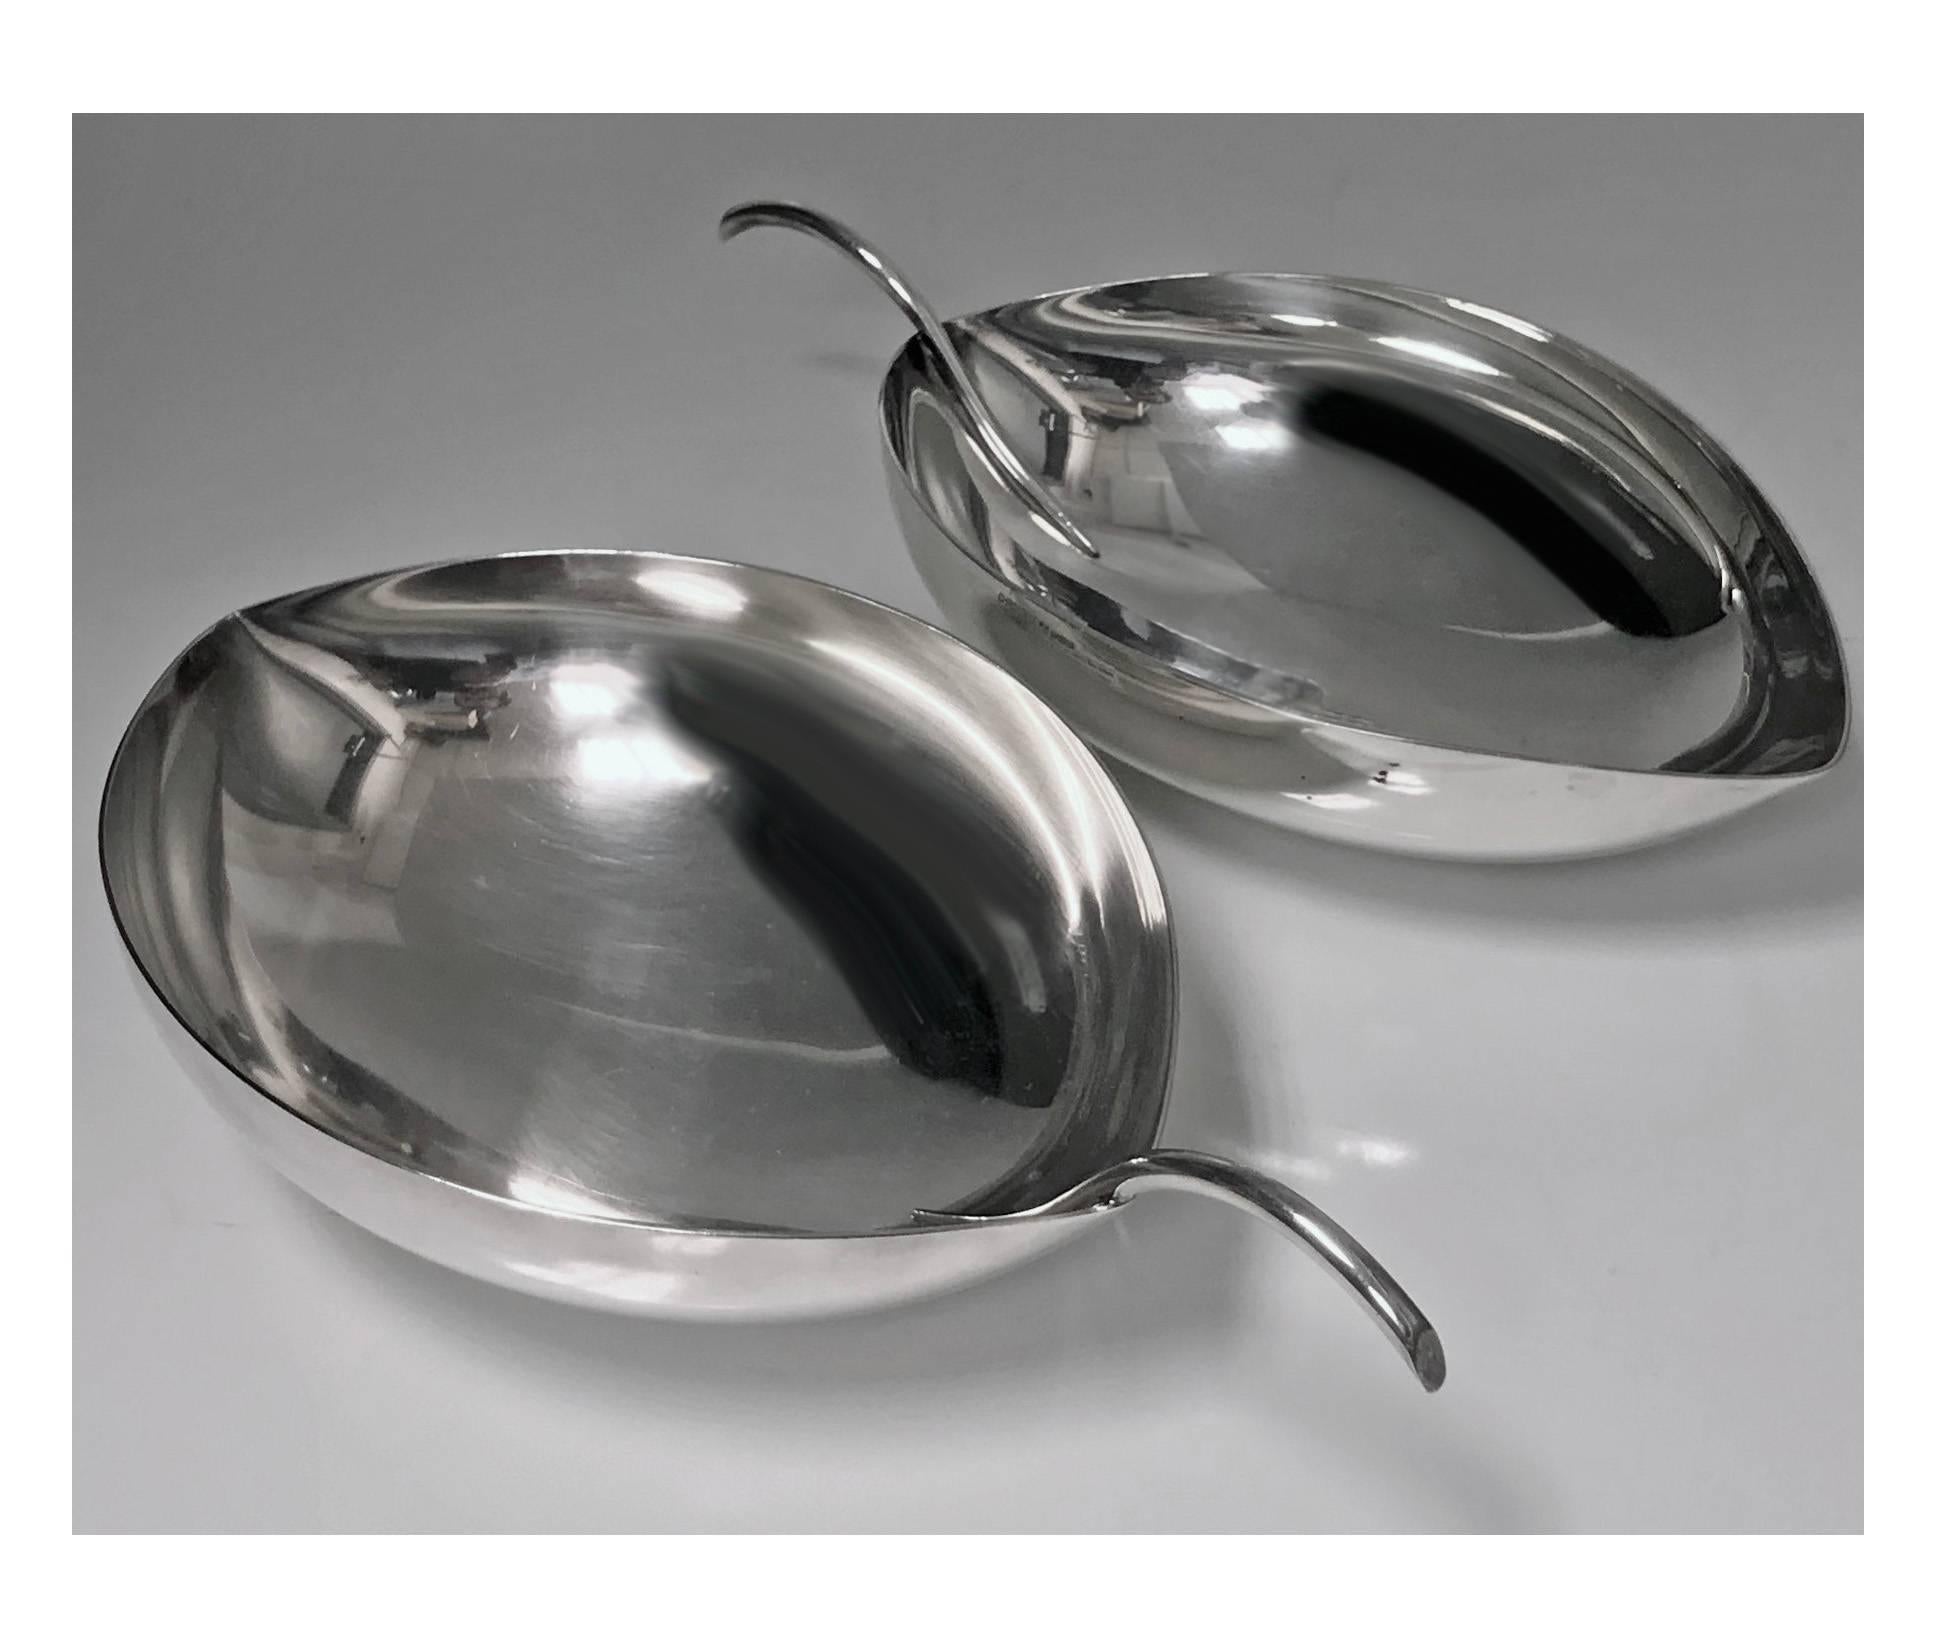 Pair of Christofle silvered metal bowls designed by Tapio Wirkkala (1915-1985) for Christofle, Gallia. Iconic plain leaf form. Measures: 9 x 5 x 2 inches. Christofle marks.